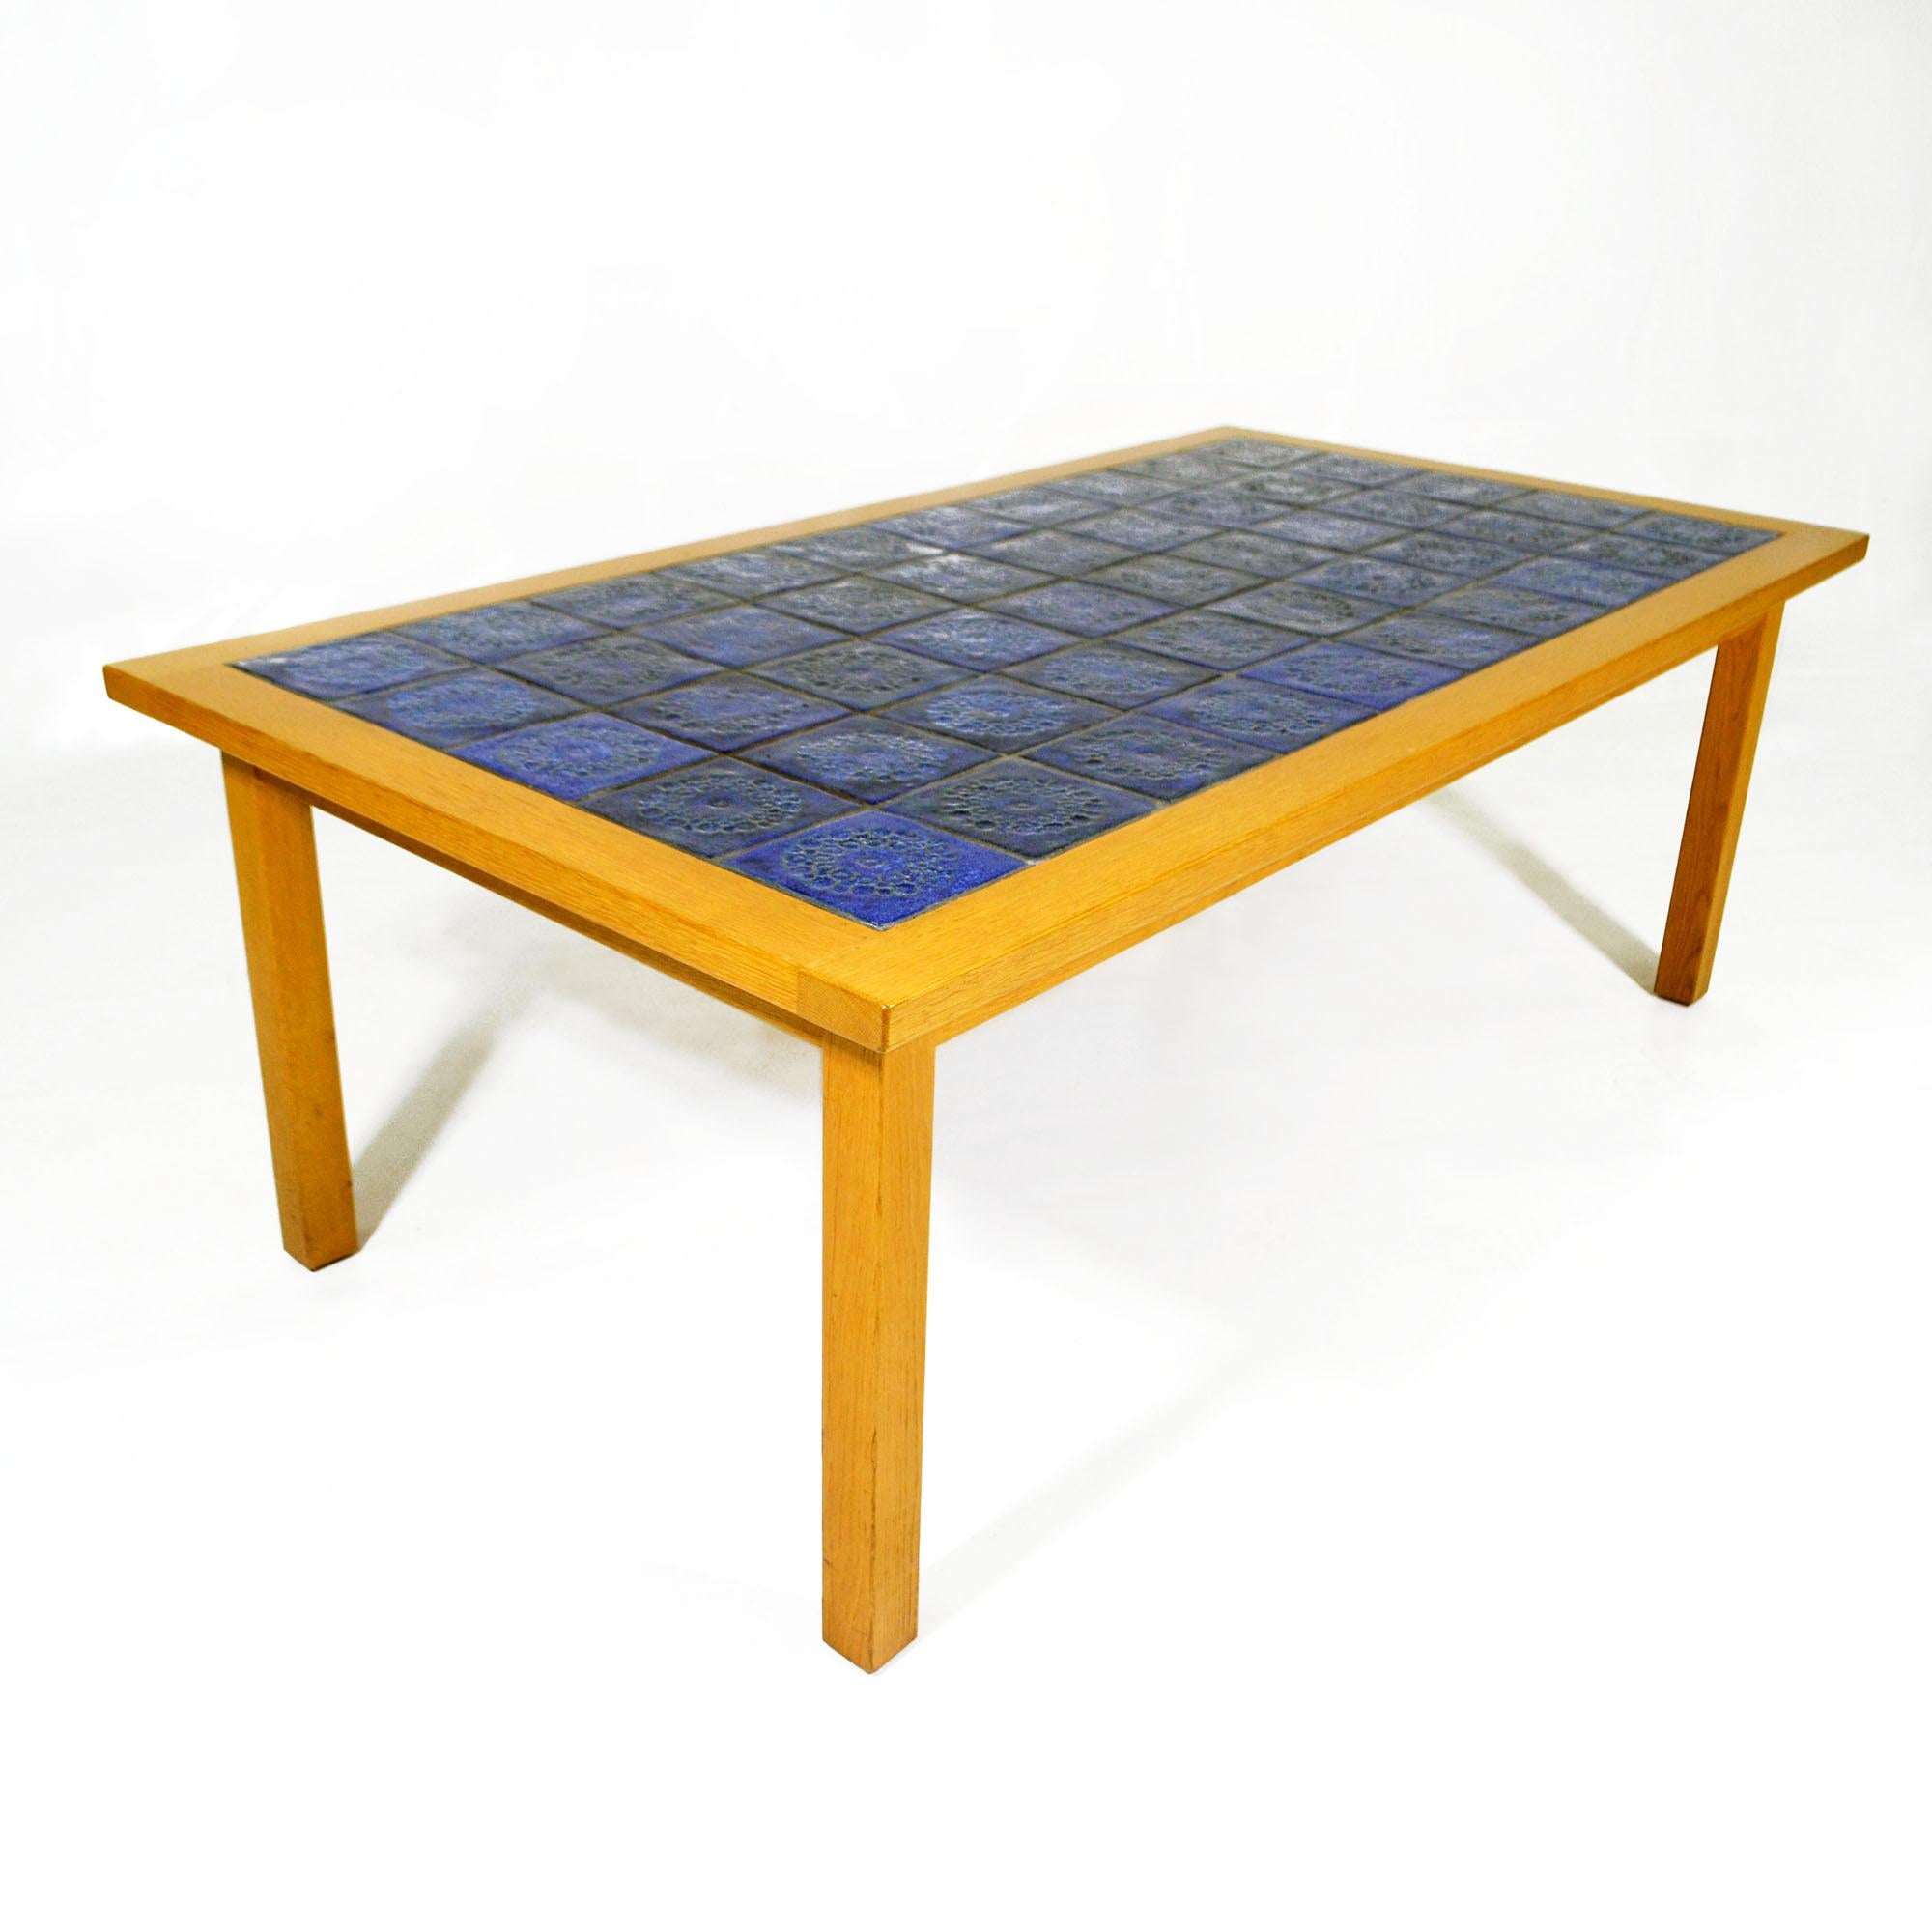 Mid-Century Modern Scandinavian coffee table, Sweden, 1960s.
Large coffee table made of teak wood and ceramic tiles made by the renowned Swedish ceramist Gabrielle Citron-Tengborg.
Very good used condition, normal wear, extra tiles